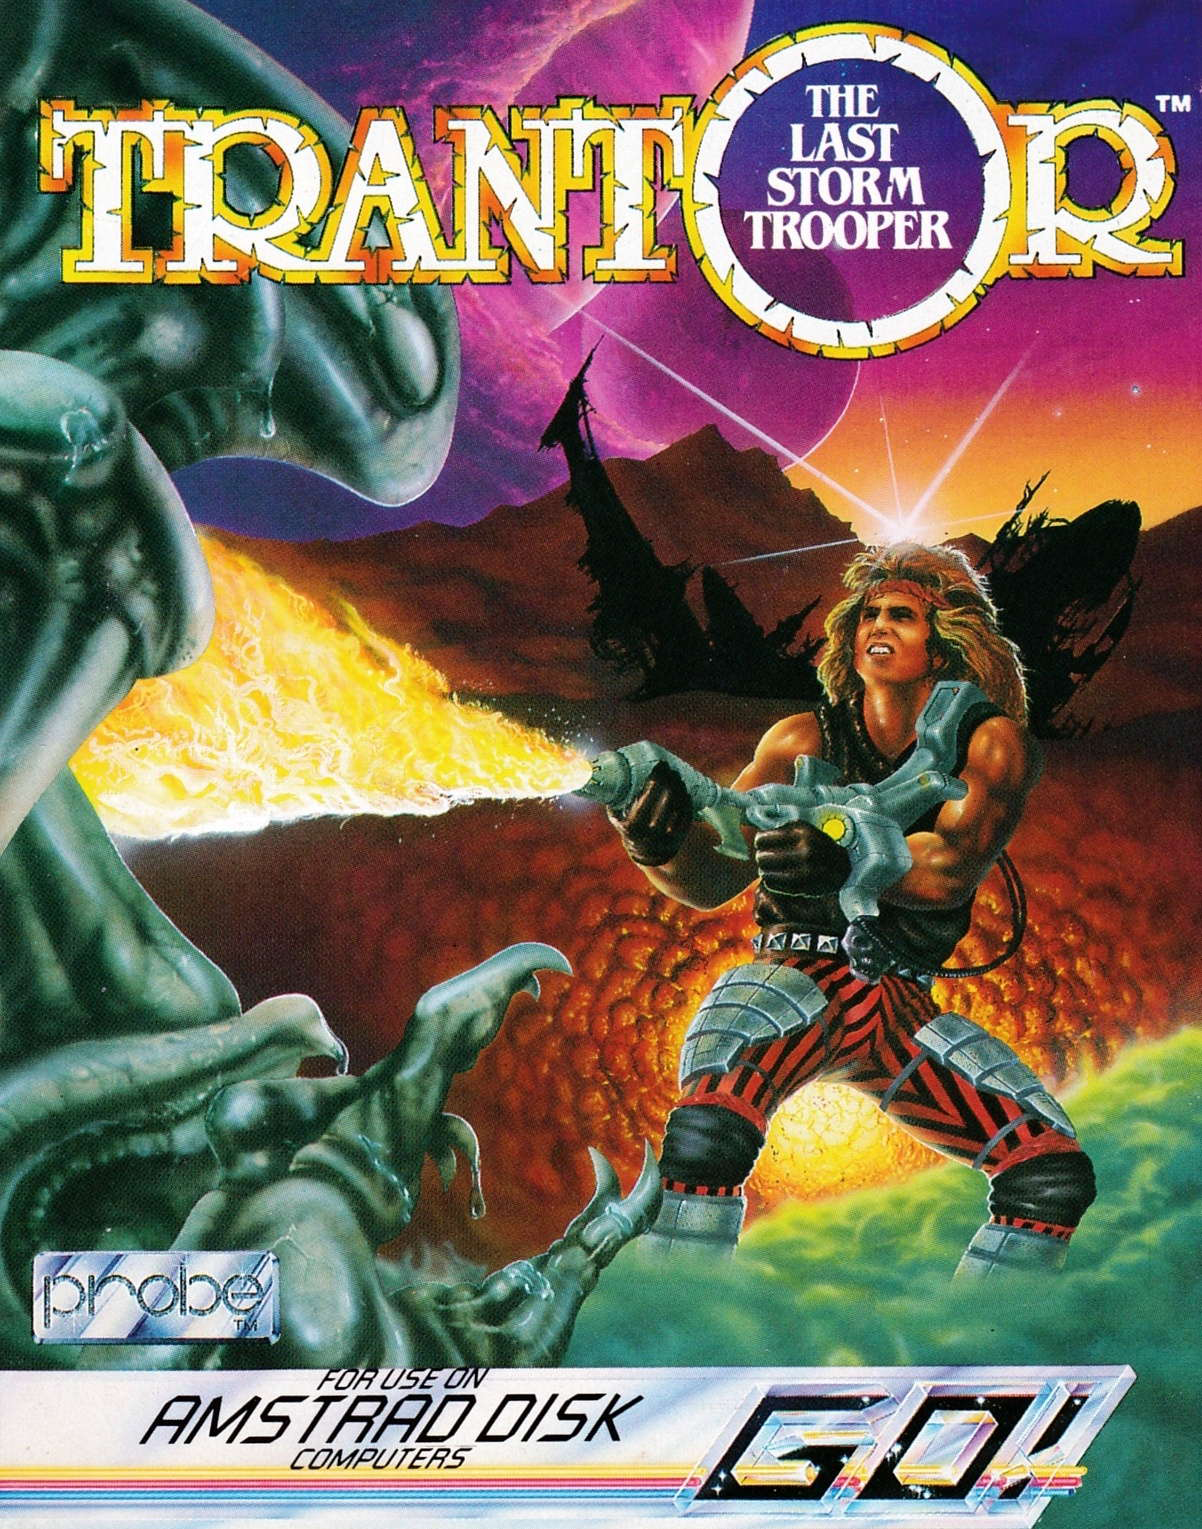 screenshot of the Amstrad CPC game Trantor The Last Stormtrooper by GameBase CPC